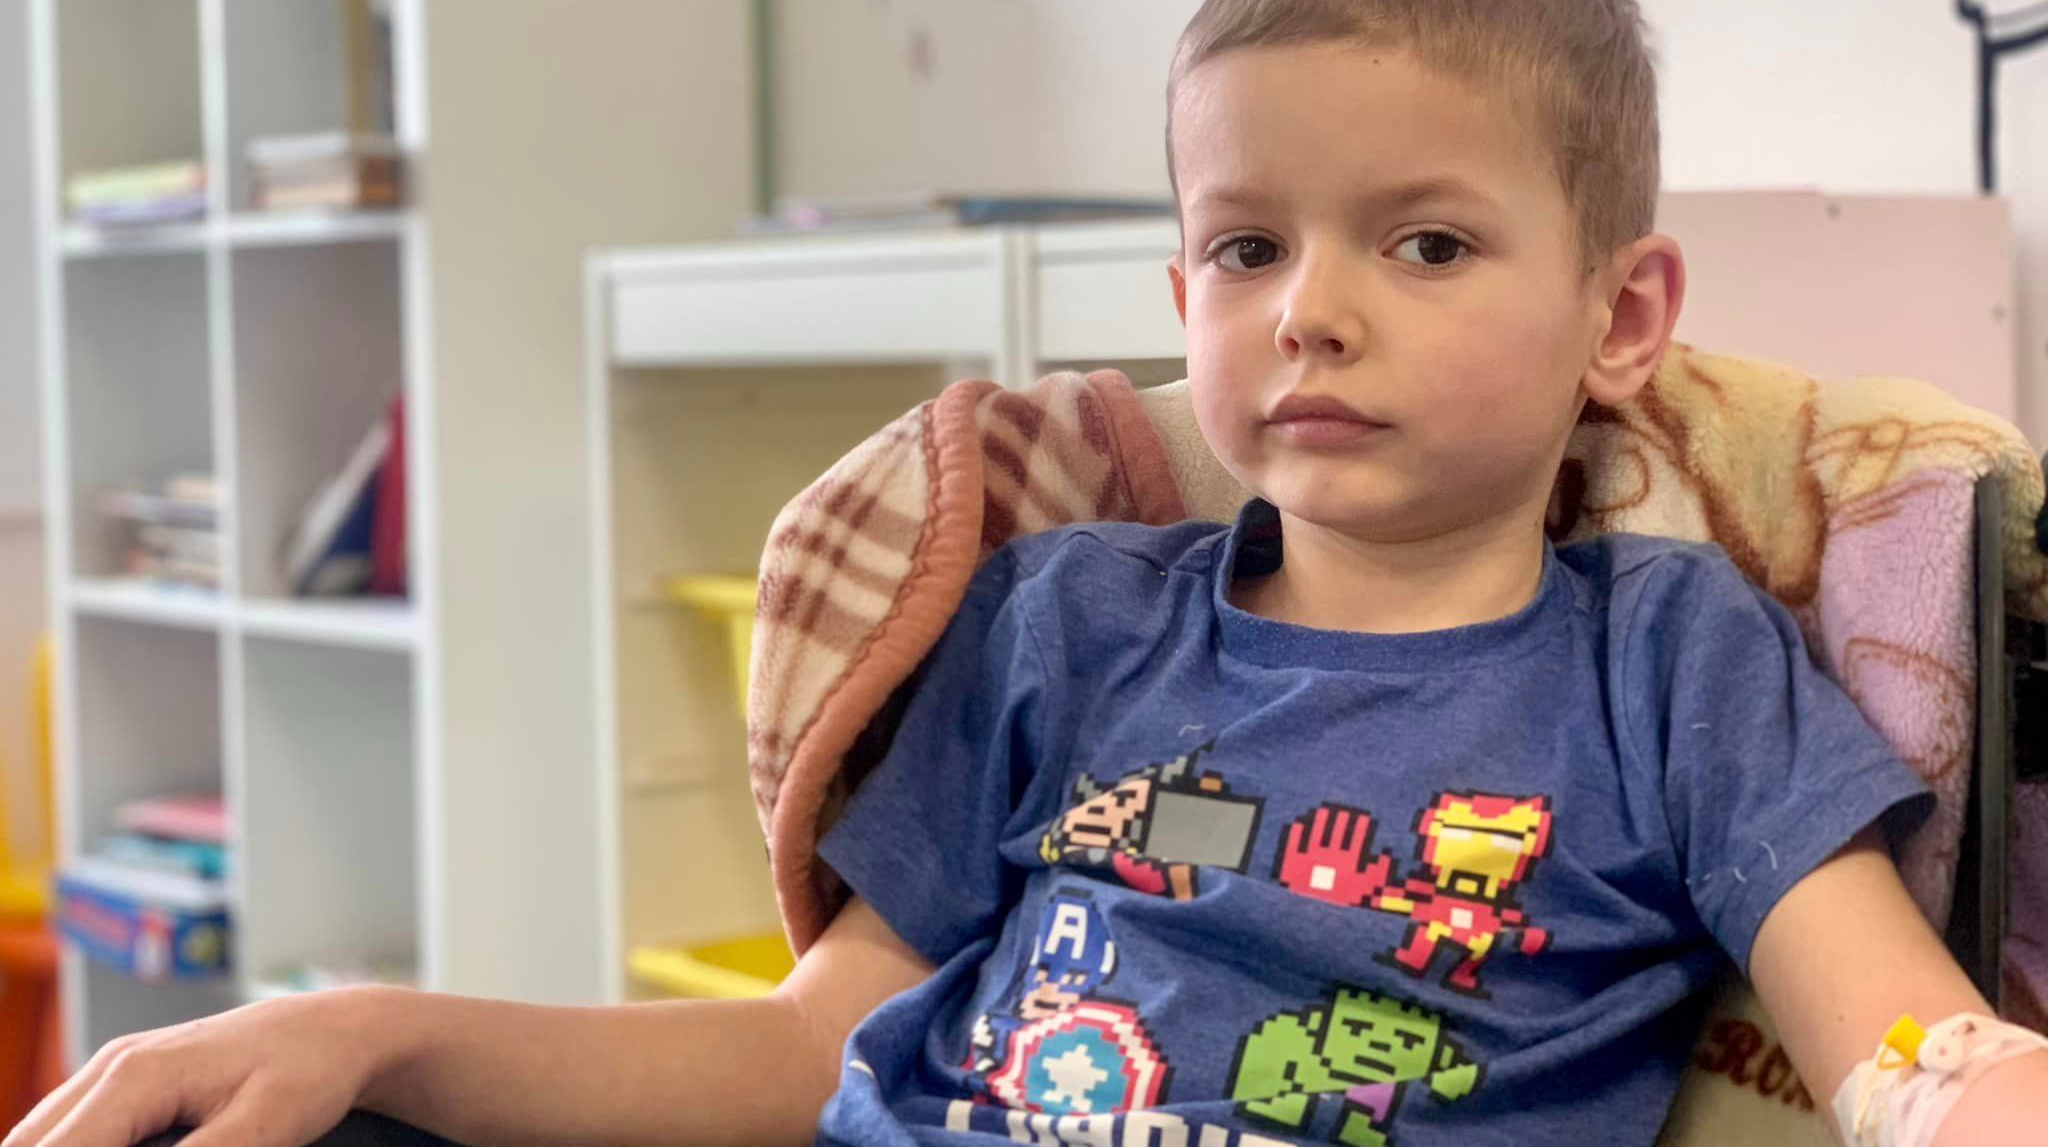 doctors removed a tumor from the bone of a 6-year-old boy